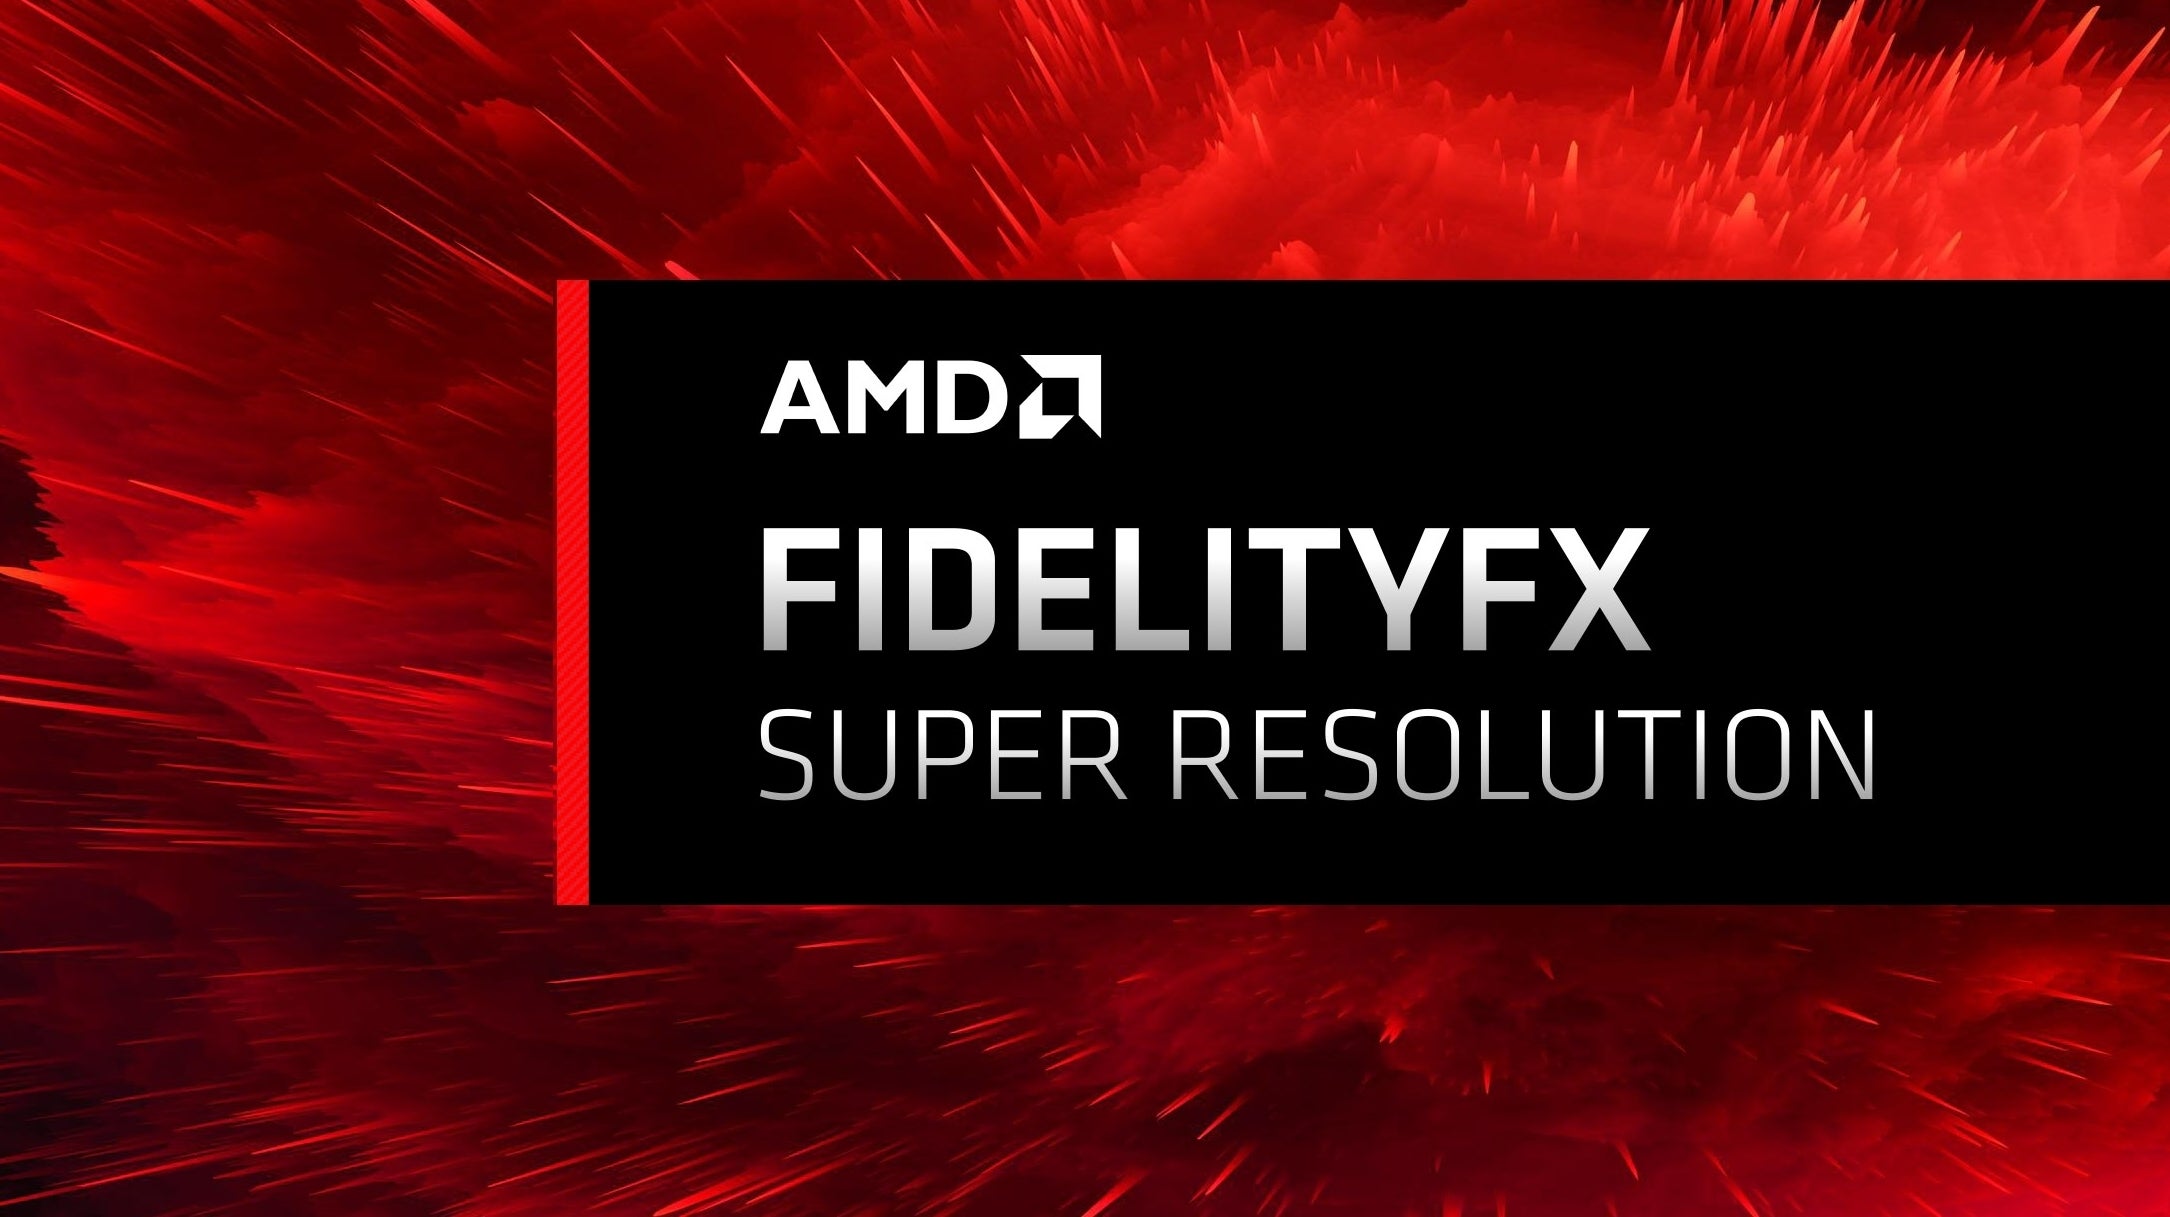 Image for AMD FidelityFX Super Resolution: the Digital Foundry interview